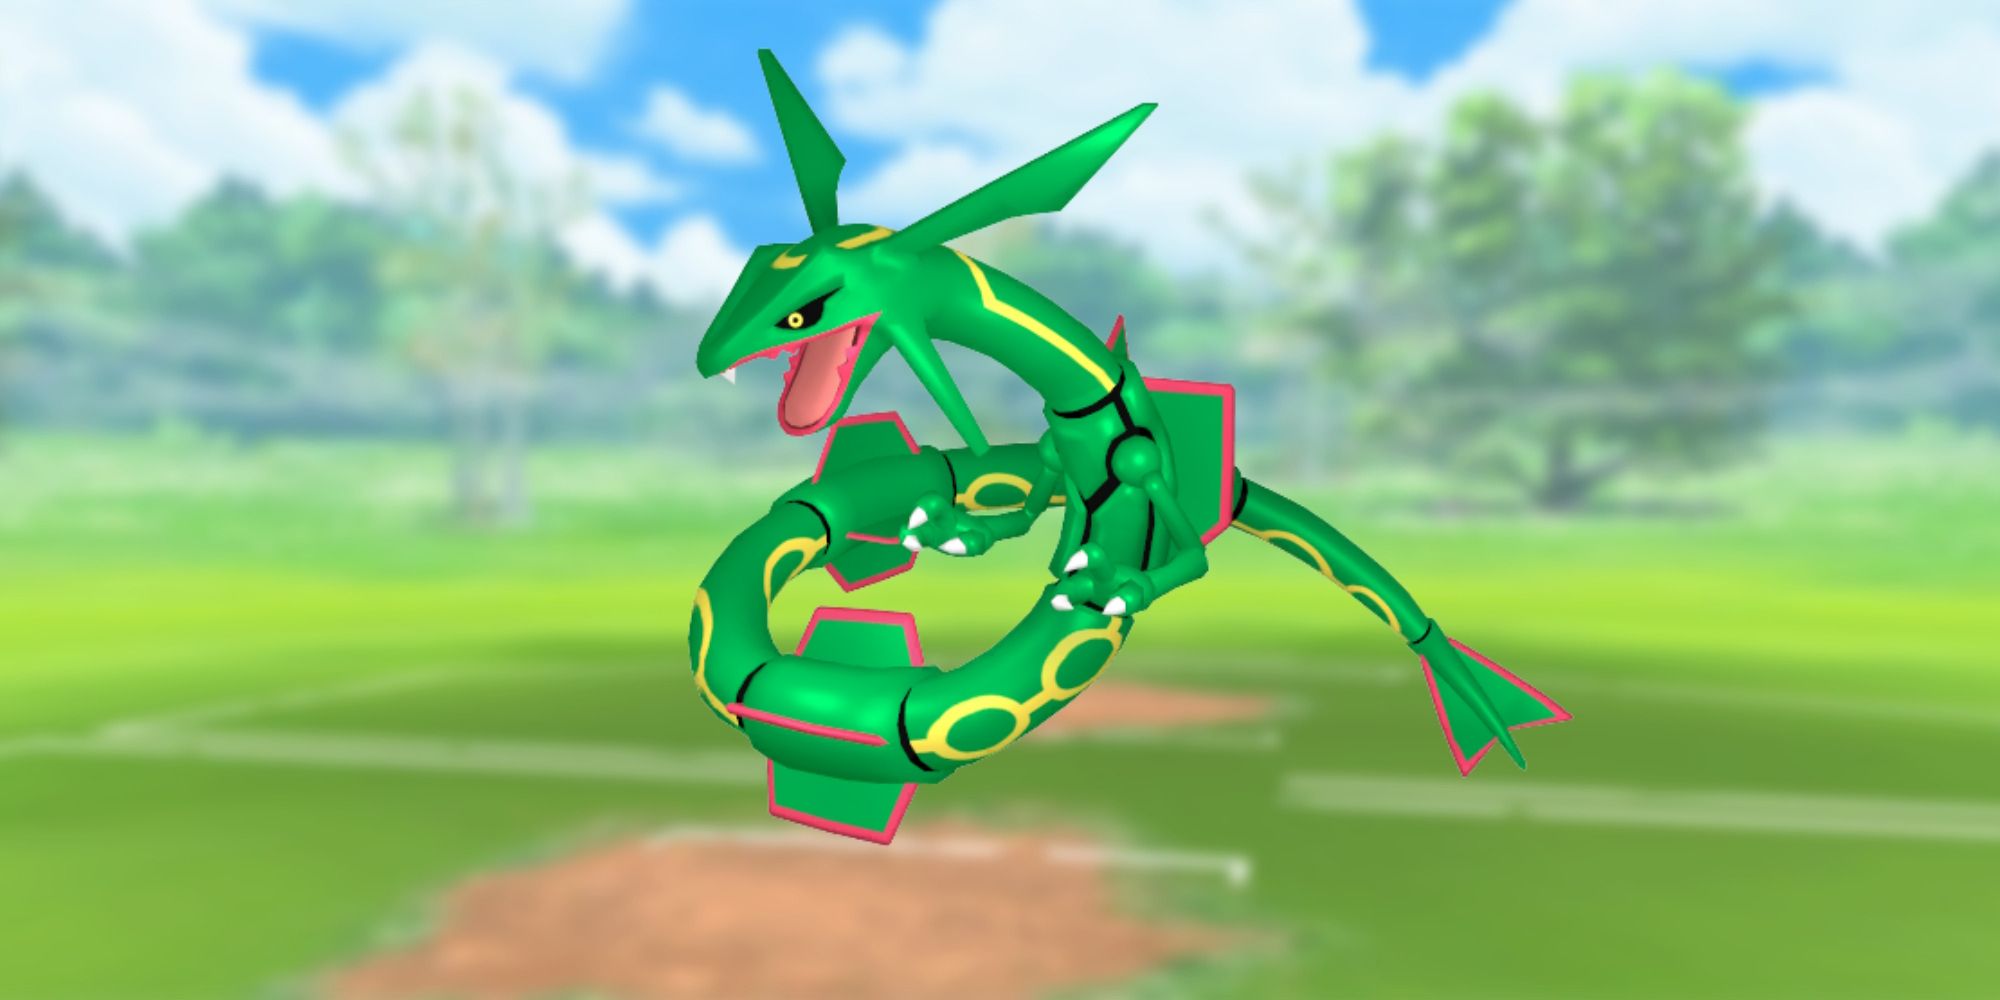 Rayquaza from Pokemon with the Pokemon Go battlefield as the background